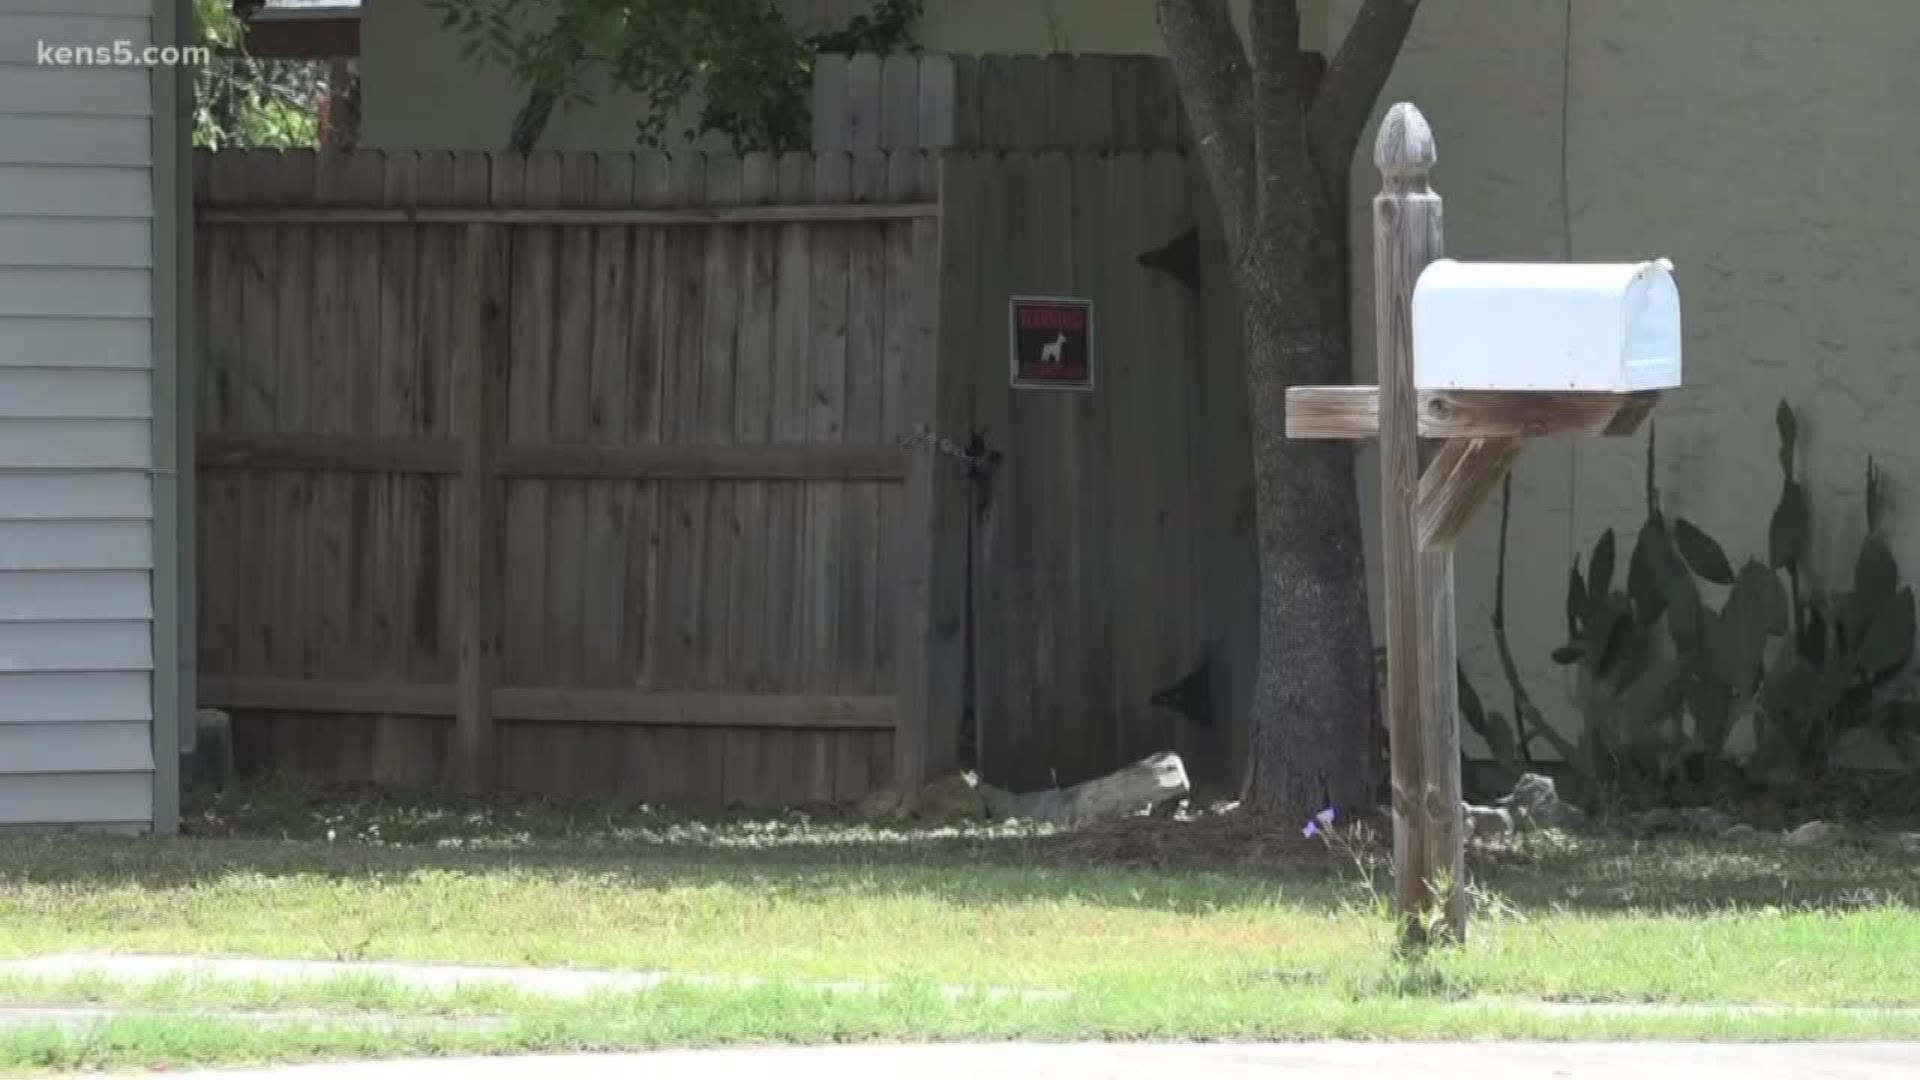 Imagine not being able to rent a home - because of the language you speak. It's the reality in one Olmos Park neighborhood as Eyewitness News reporter Savannah Louie shows us.